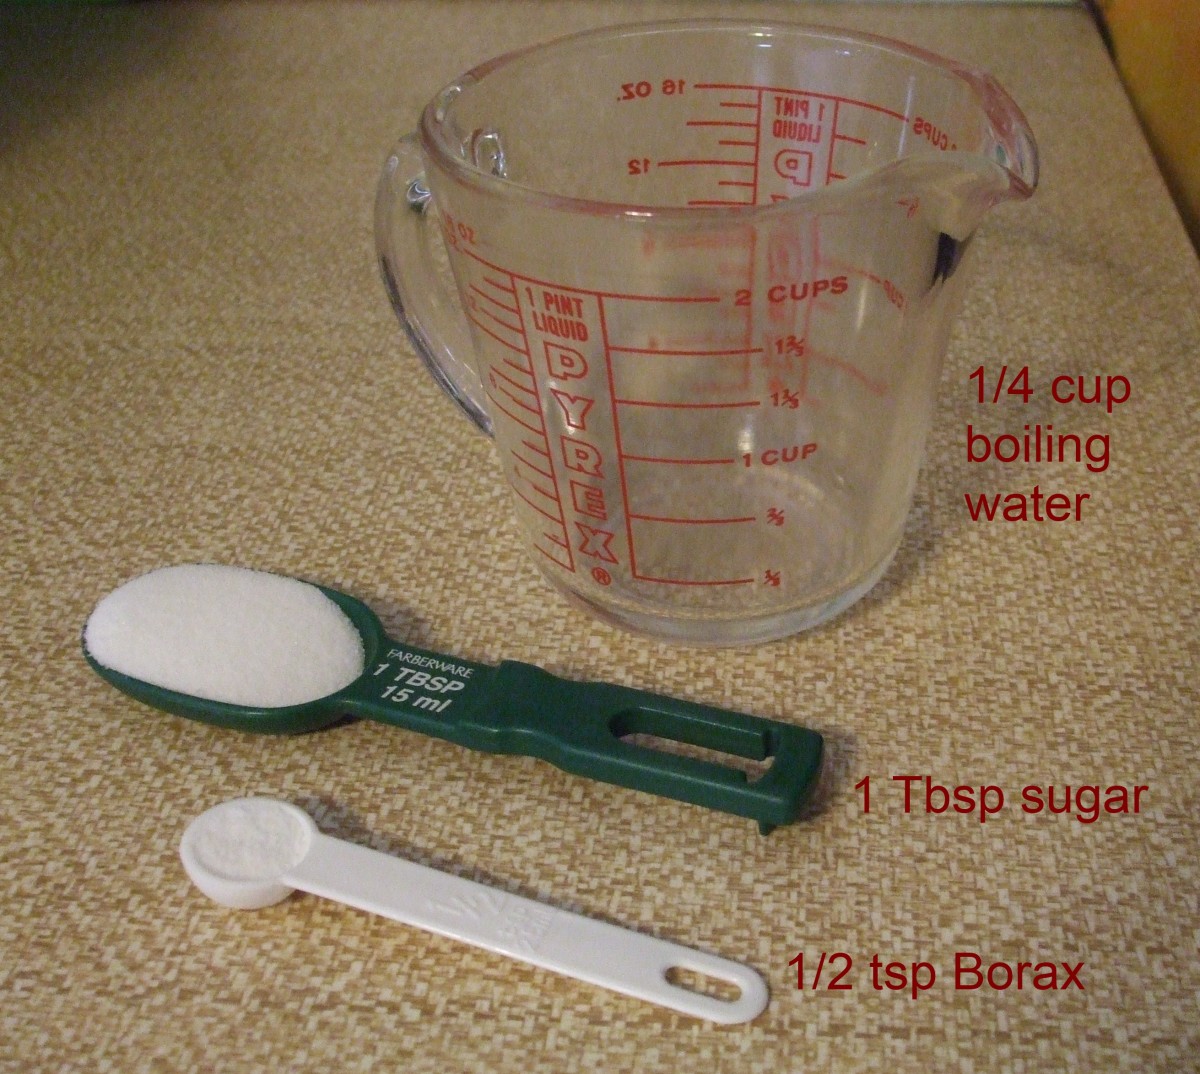 White table sugar, borax powder, and a Pyrex measuring cup for mixing with the boiling water.